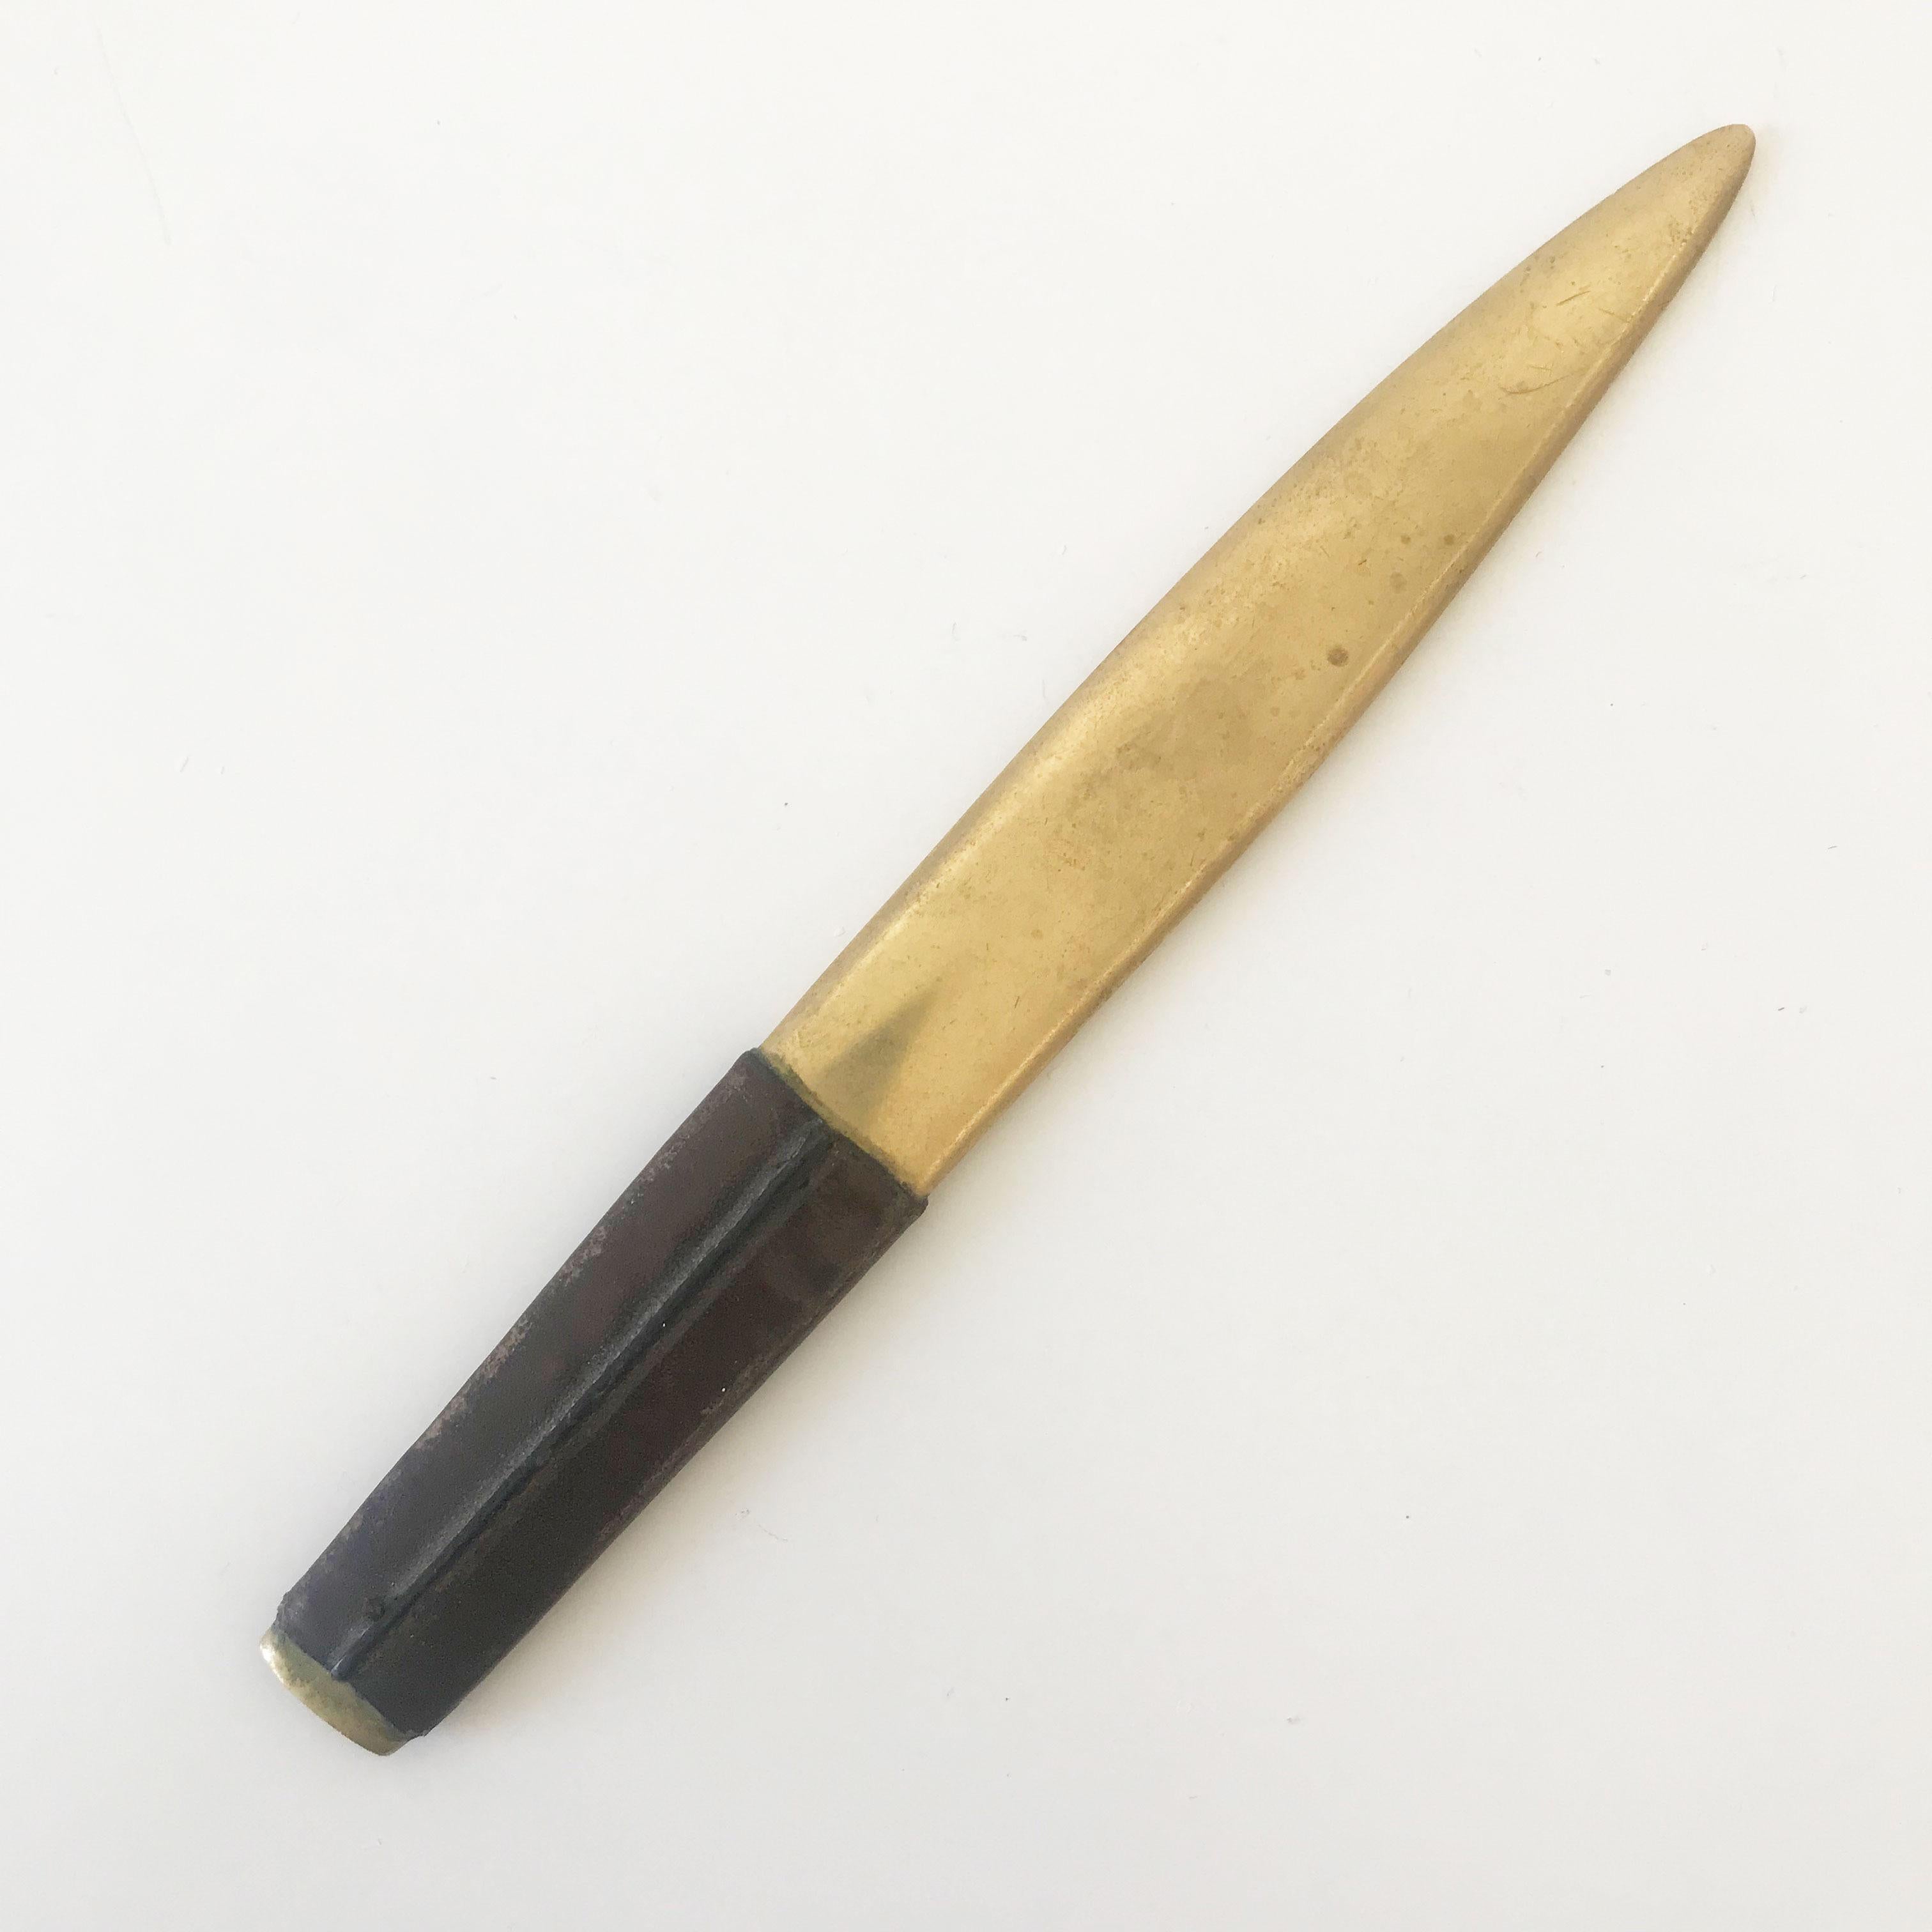 Unique Mid-Century Modern letter opener. Designed and manufactured by Carl Auböck in Vienna, Austria, 1950s. 

Executed in solid brass and leather.

Measurements:
L 8.07 in. x W 0.90 in. / L 20,5 cm x 2.3 cm.

Condition:
Good original vintage